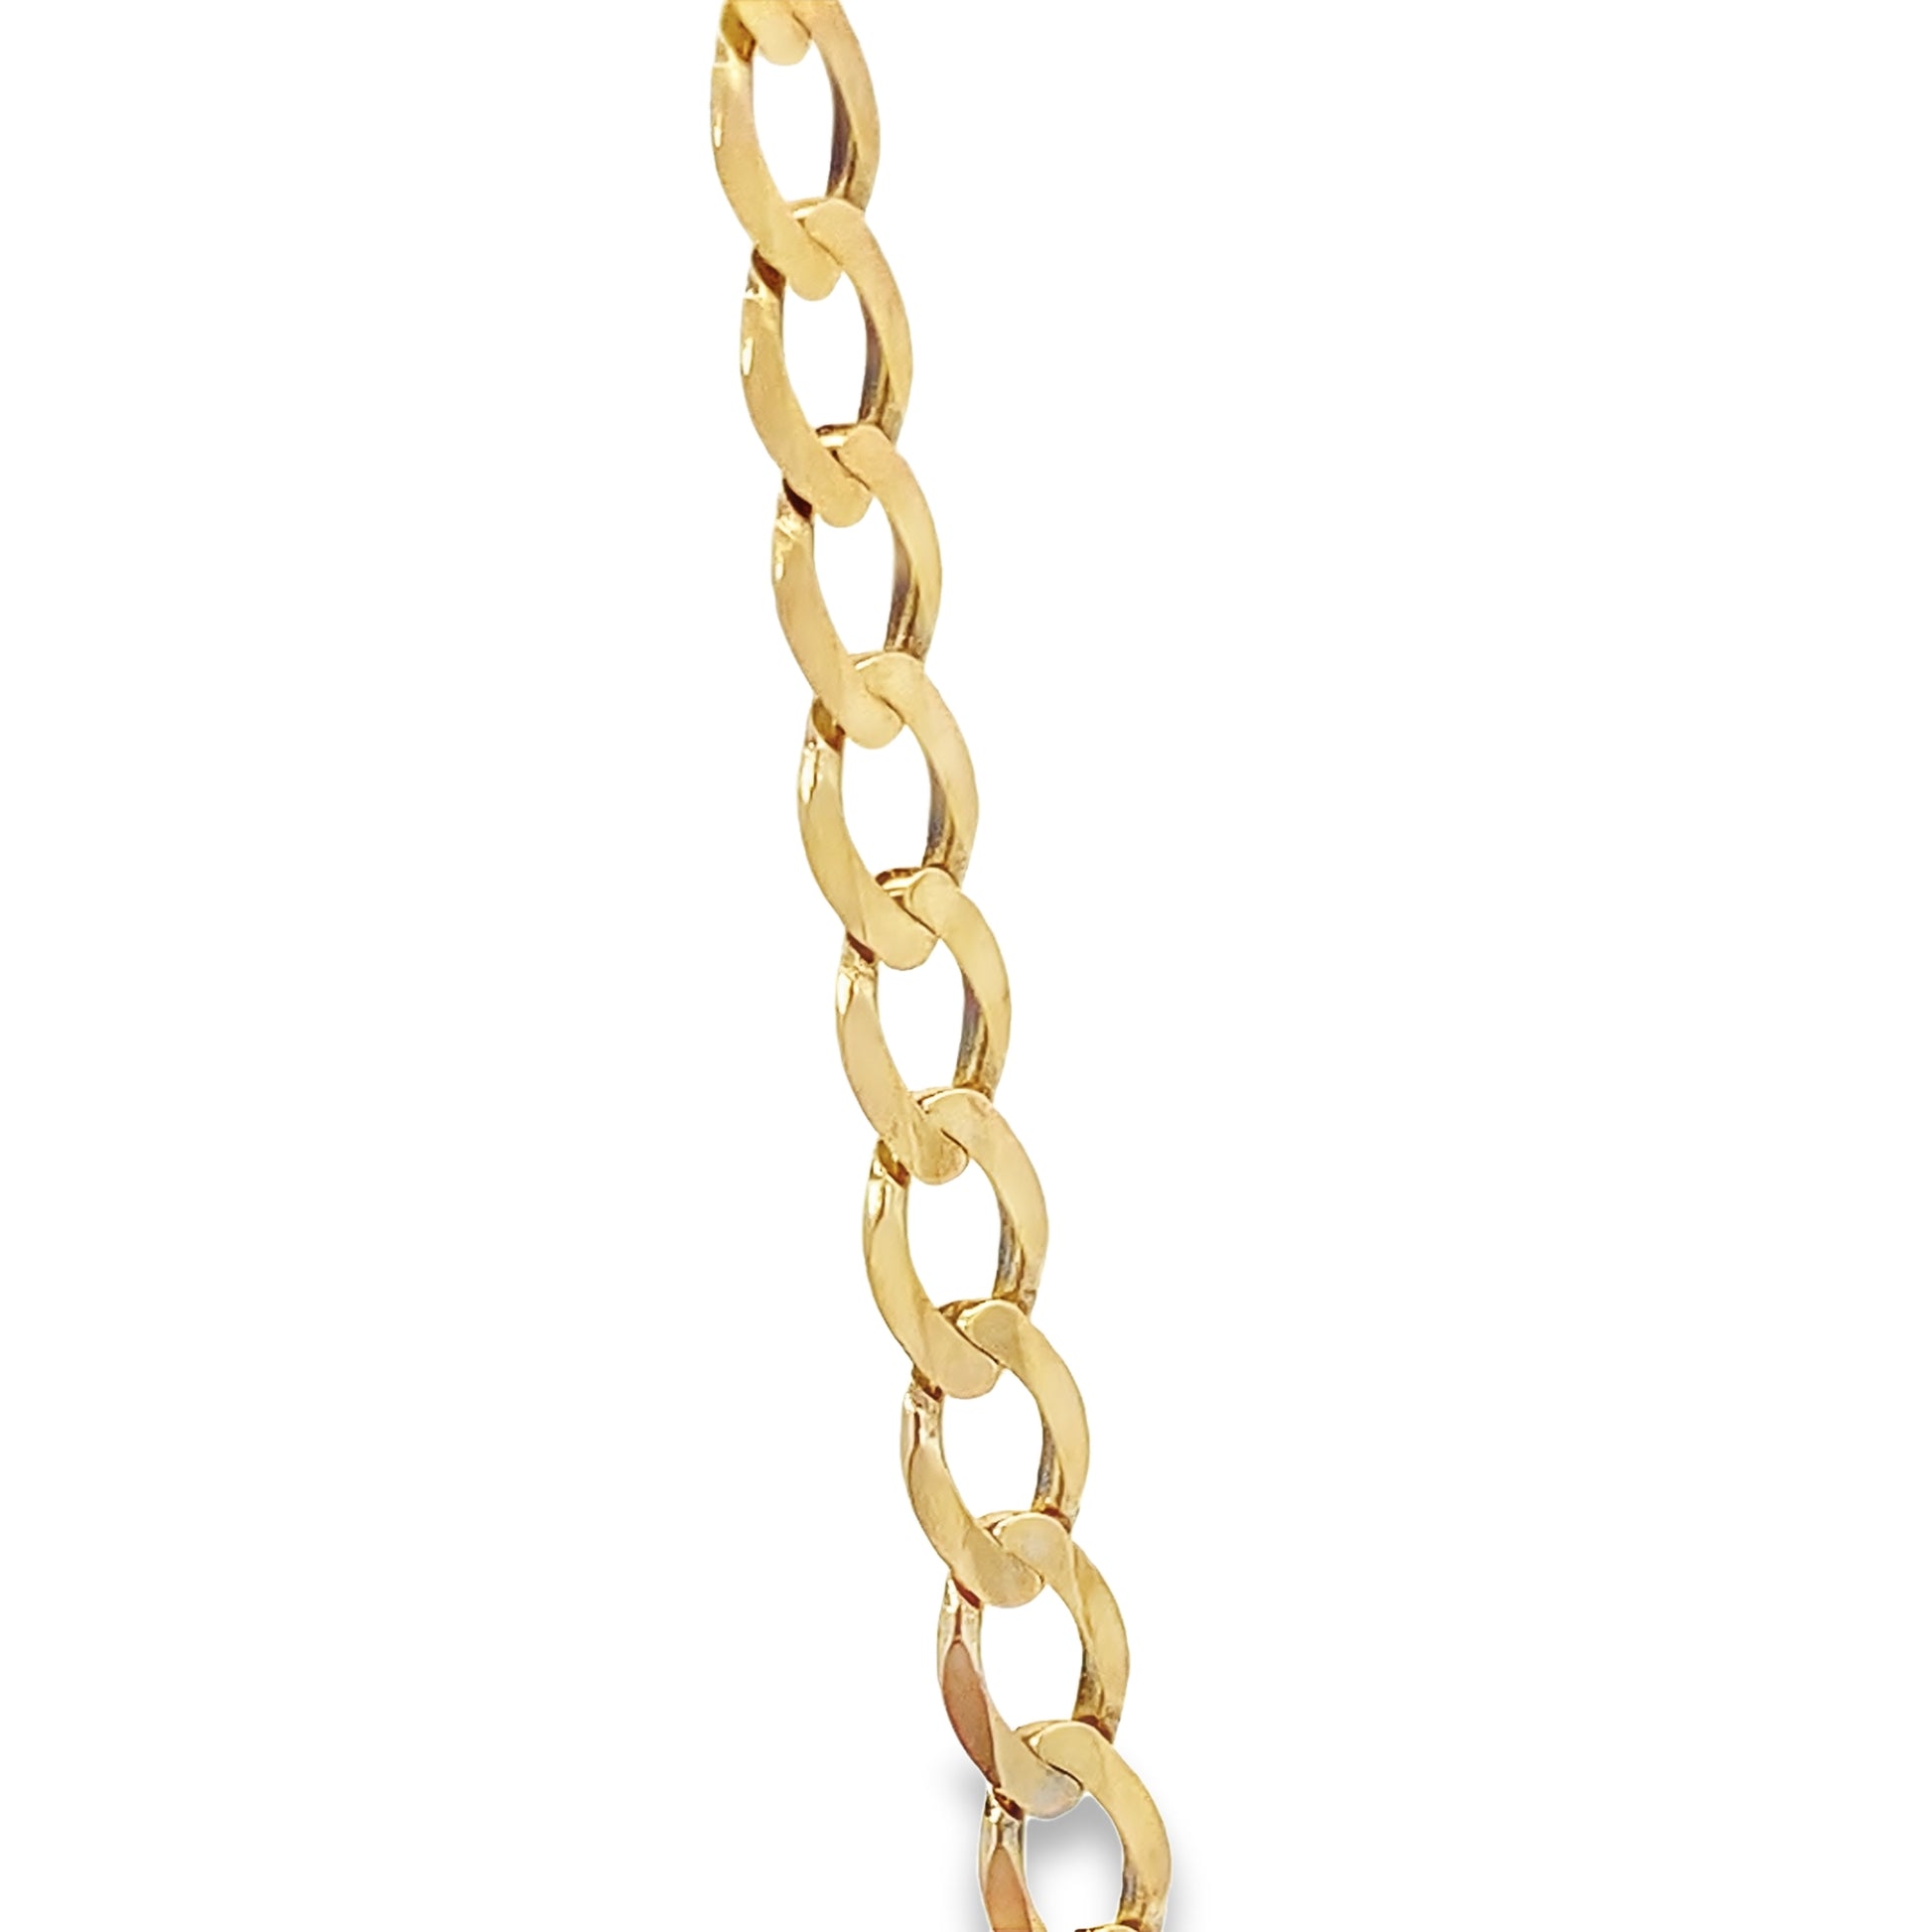 10K Yellow Gold Curb Link Chain 3.5Mm 21In 4.4Dwt